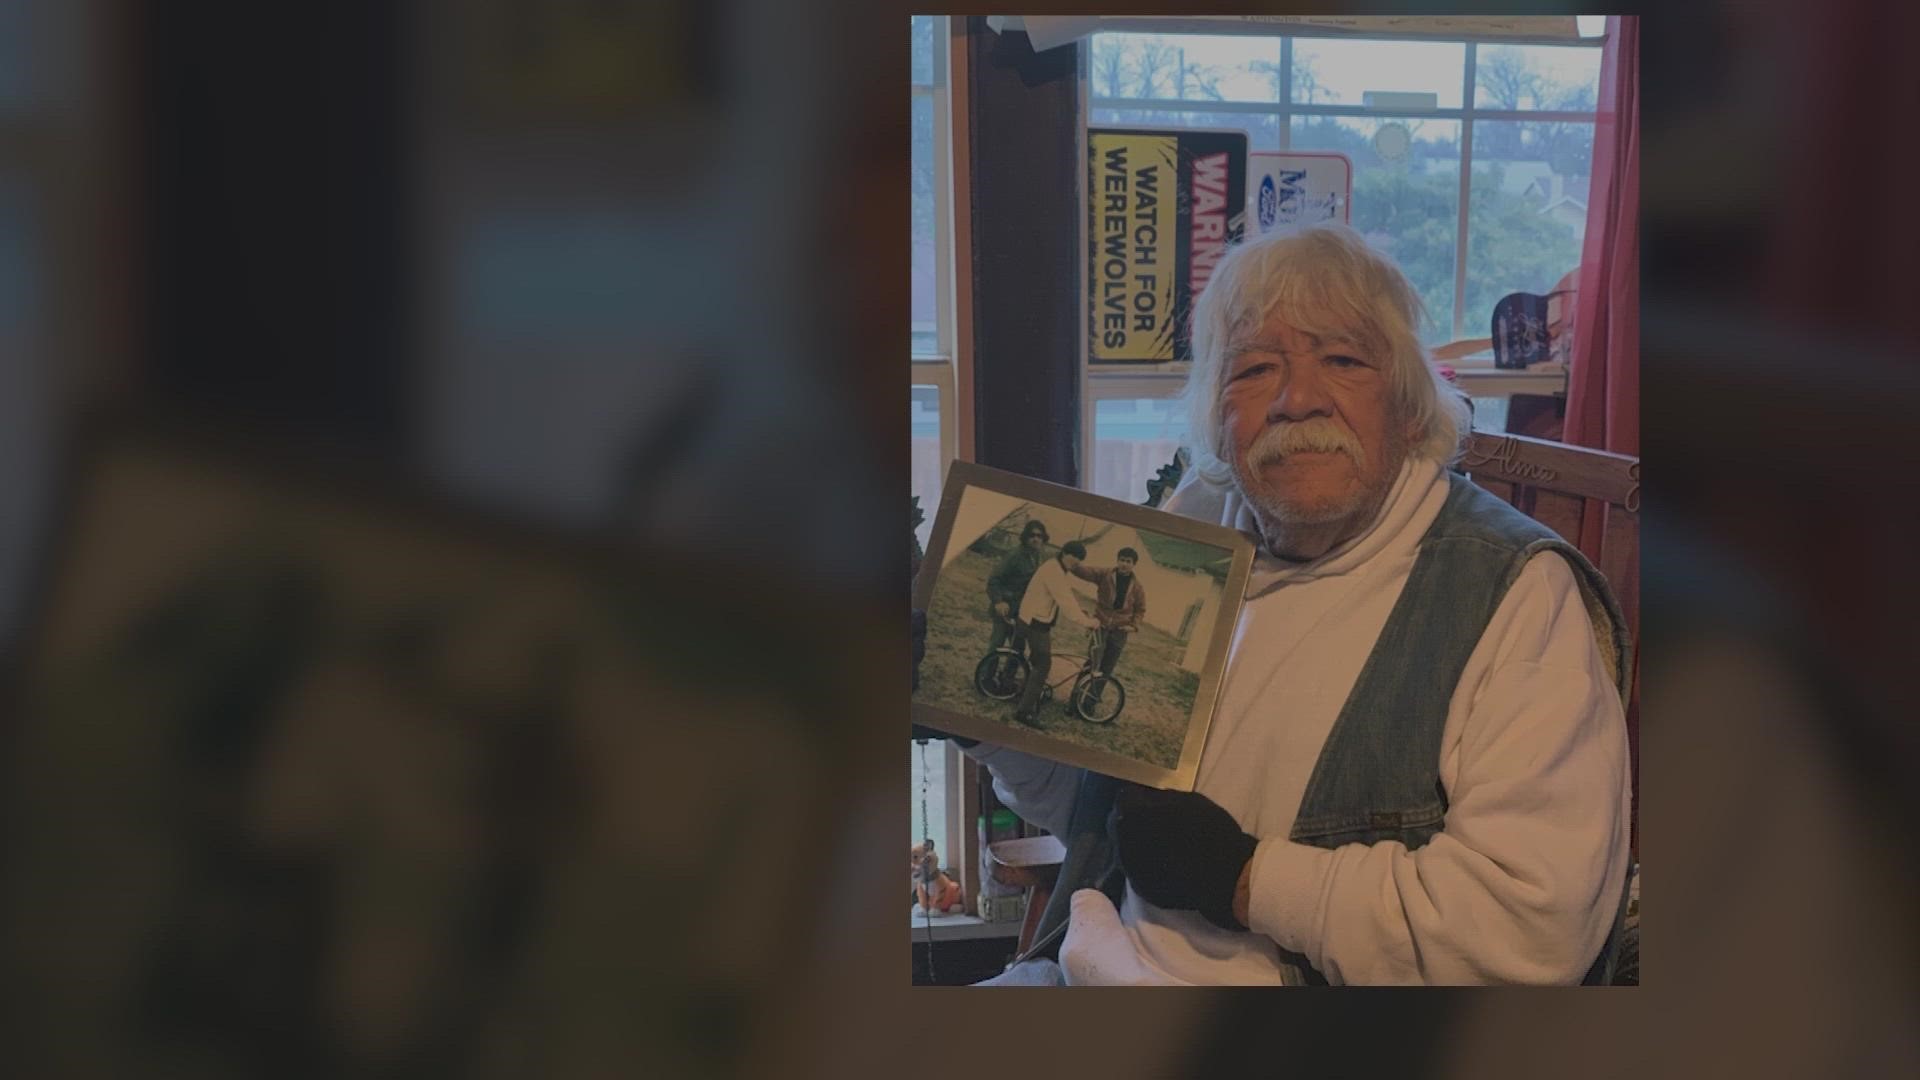 Police released video of a suspect vehicle involved in a deadly hit-and-run along Vaughn and Avenue H on Friday night. Juan Garcia, 74, was killed.